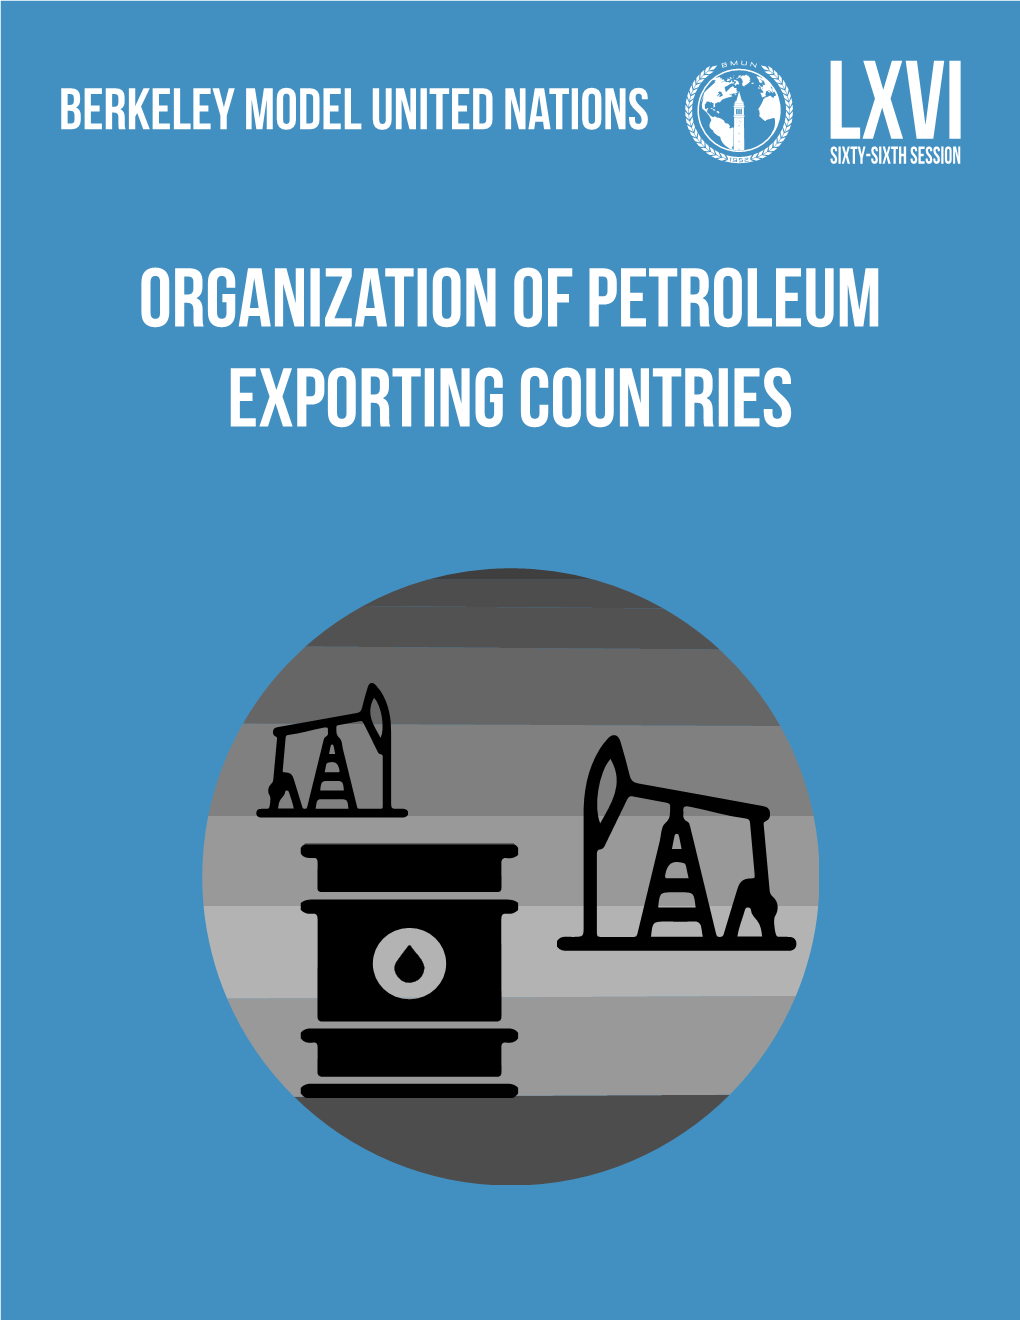 Organization of Petroleum Exporting Countries Welcome Letter